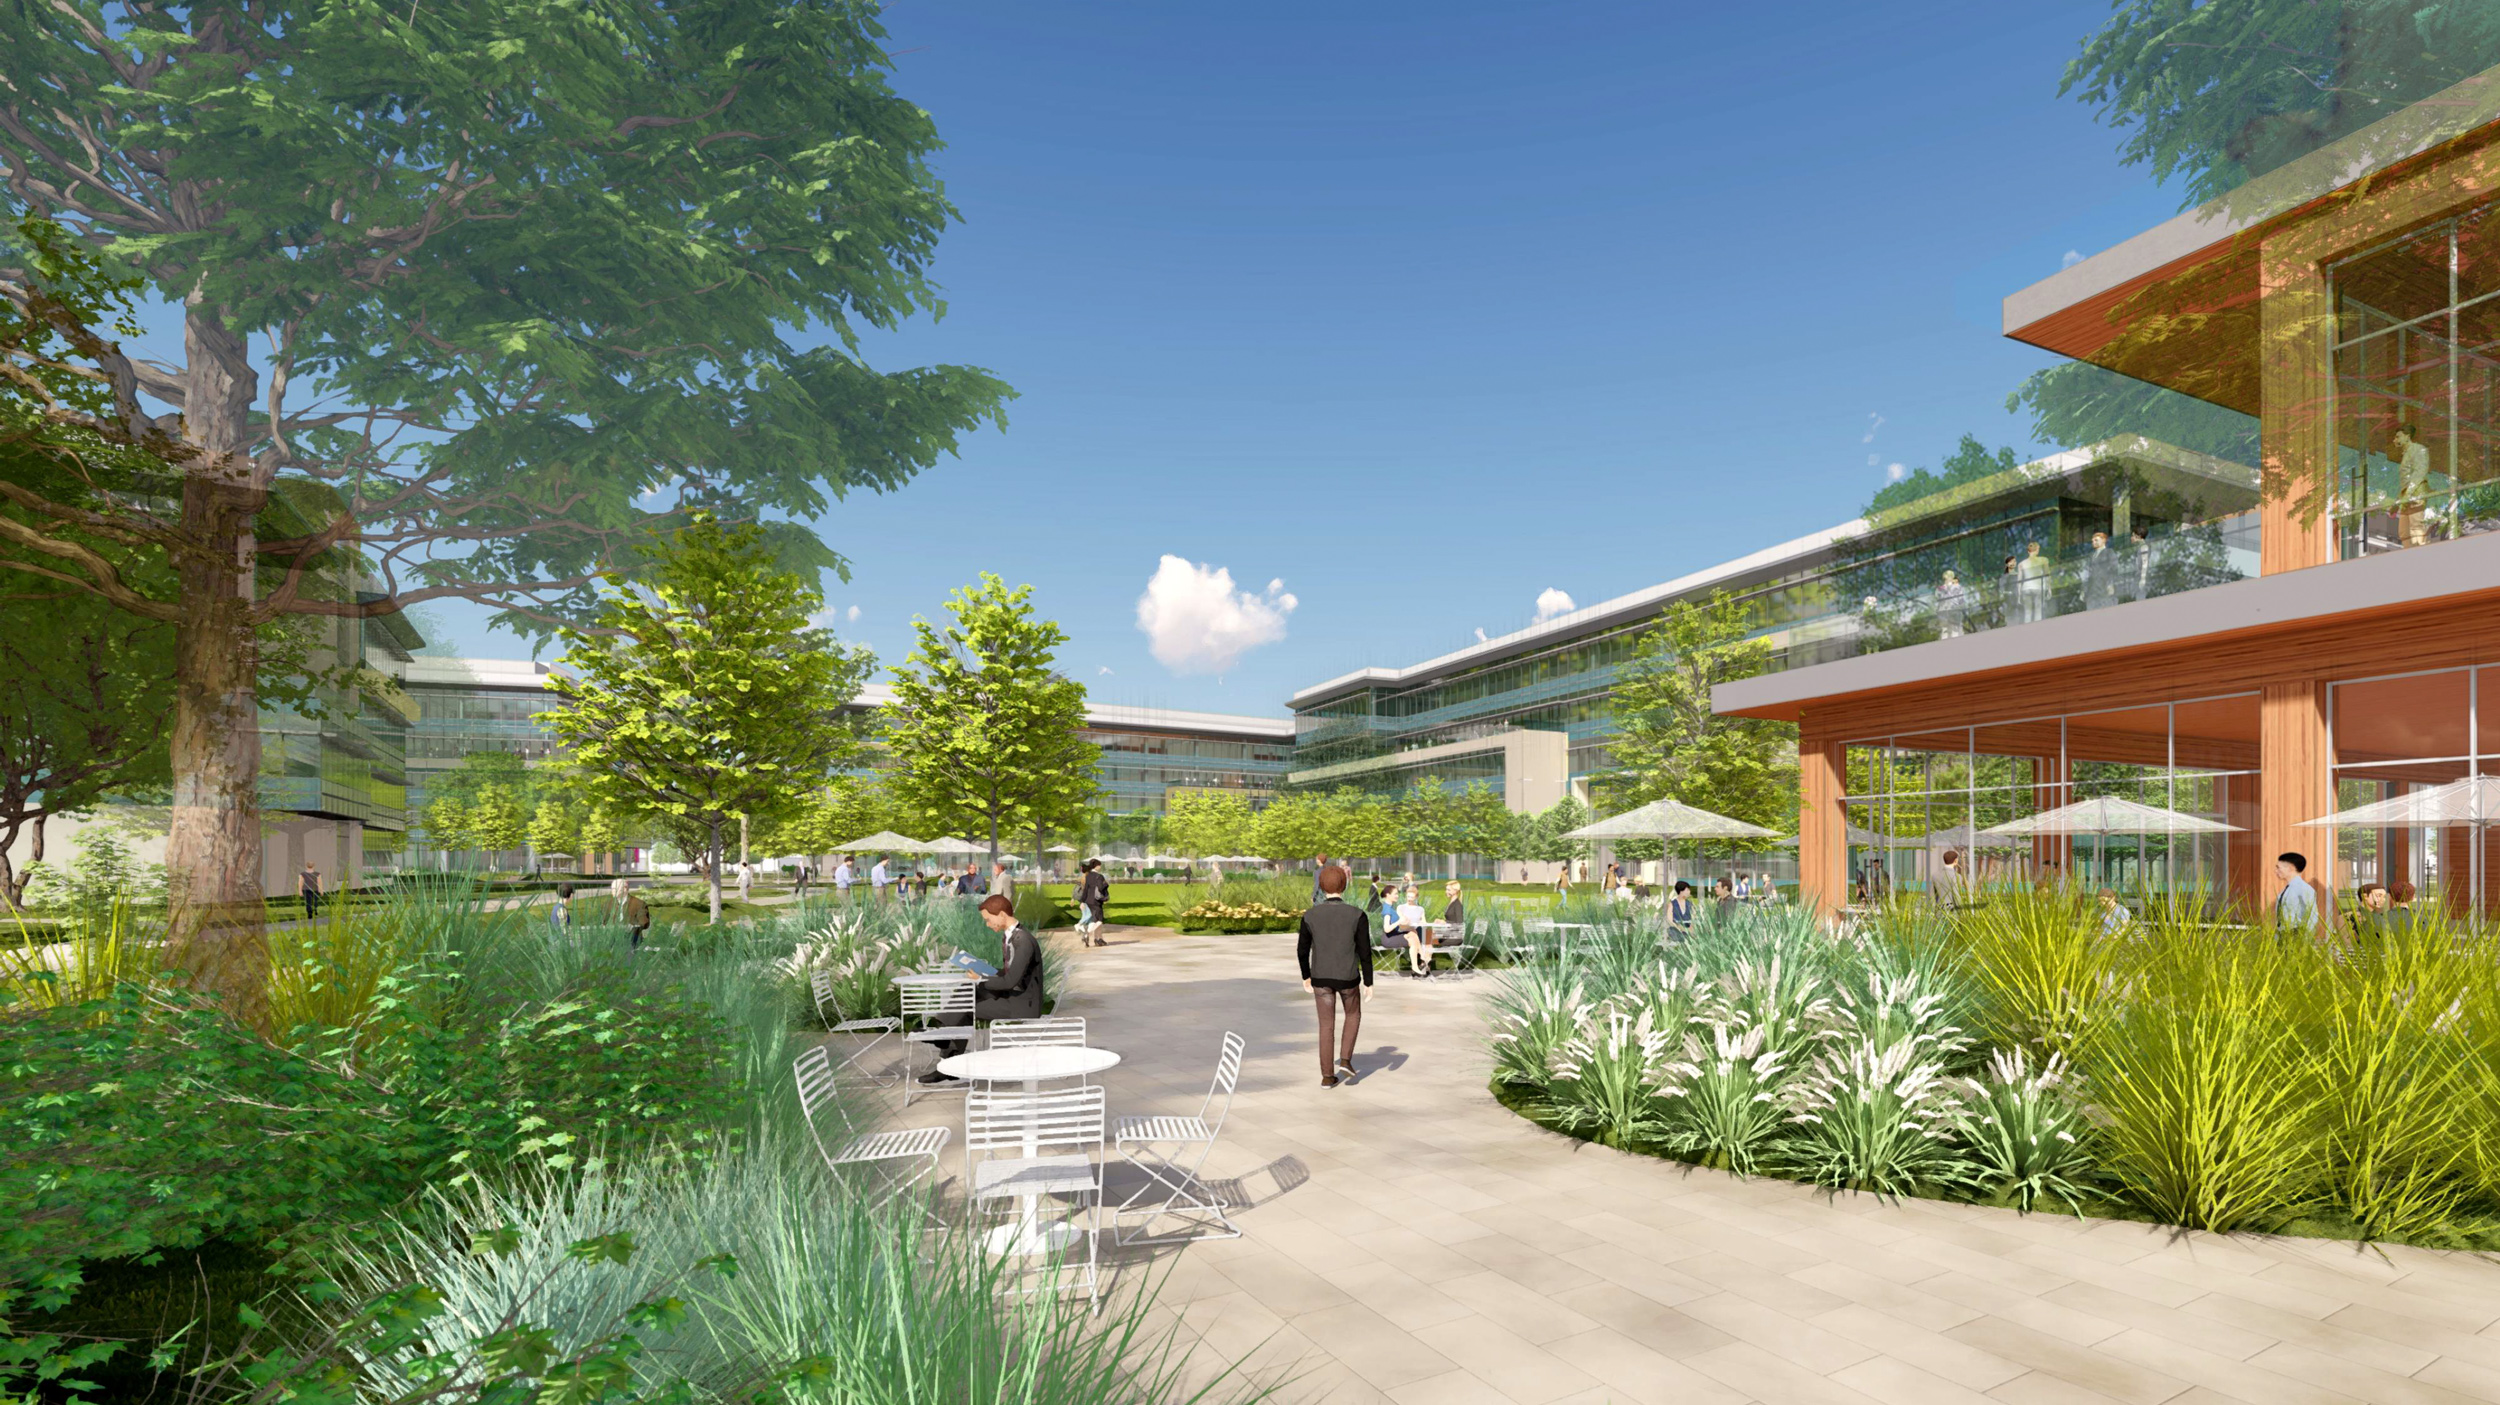 Parkline pathway beside the amenity building, rendering by STUDIOS Architecture